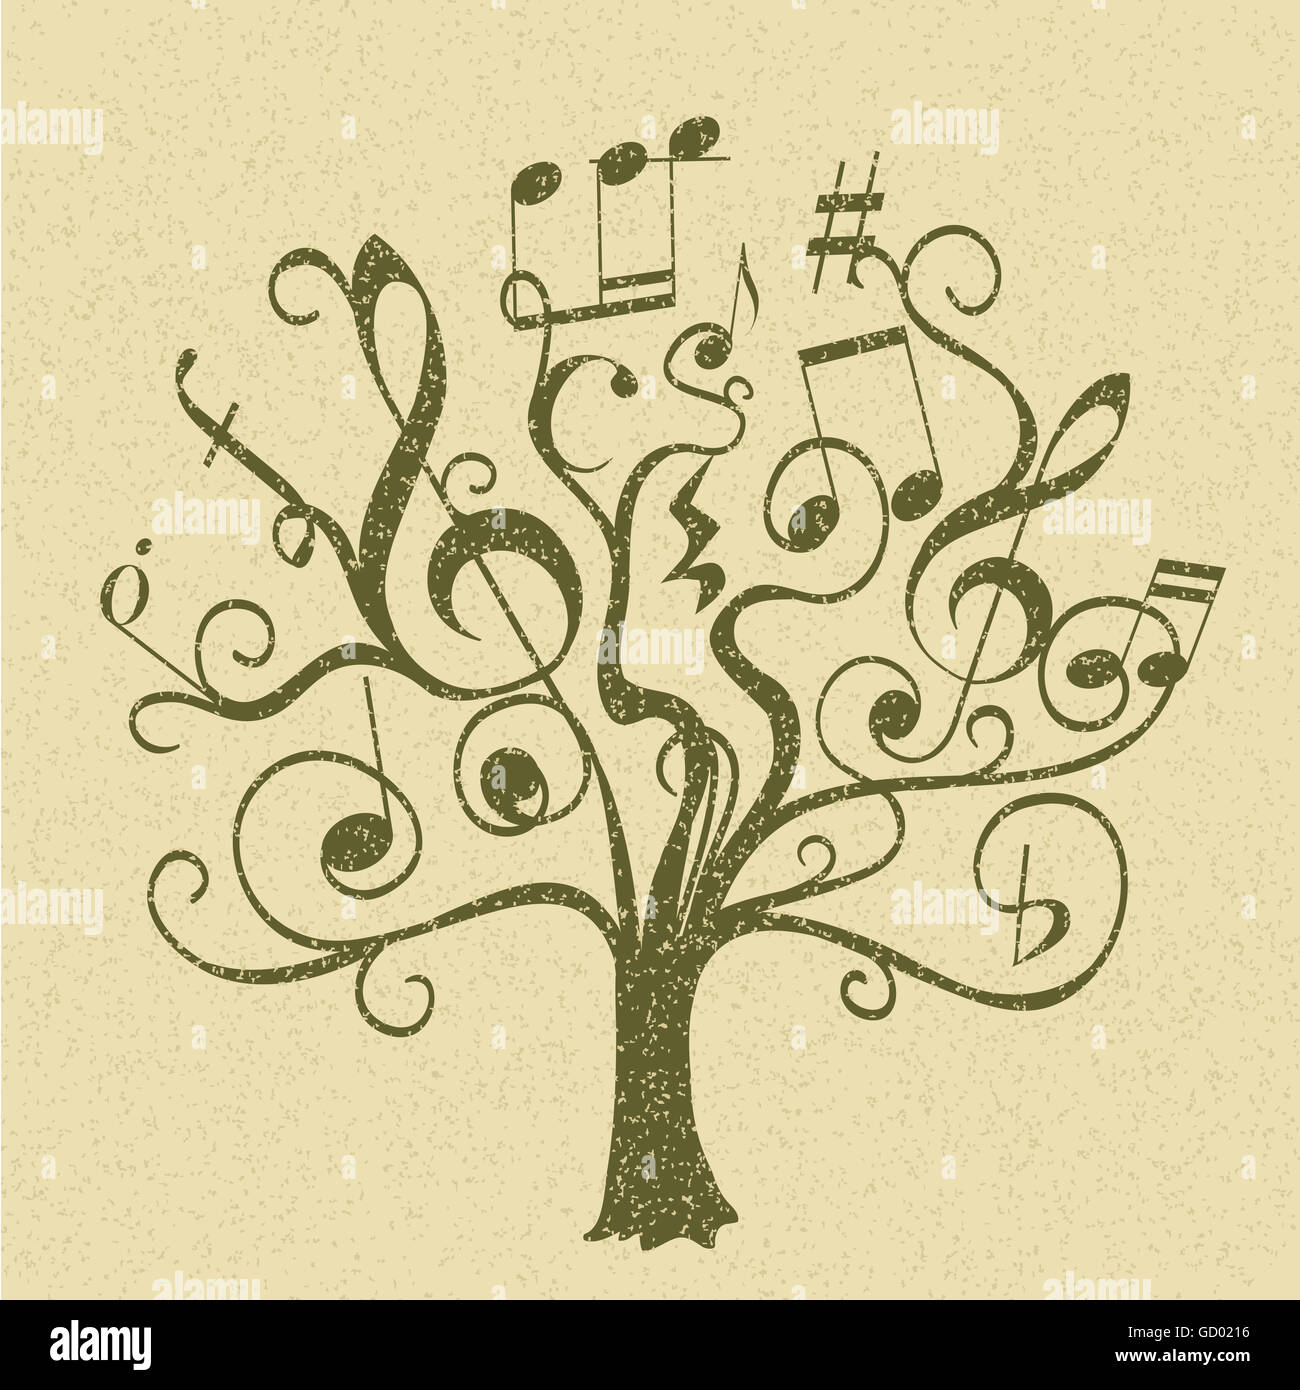 hand drawn tree with curly twigs with musical notes and signs as leaves and flowers. abstract conceptual illustration on musical Stock Photo